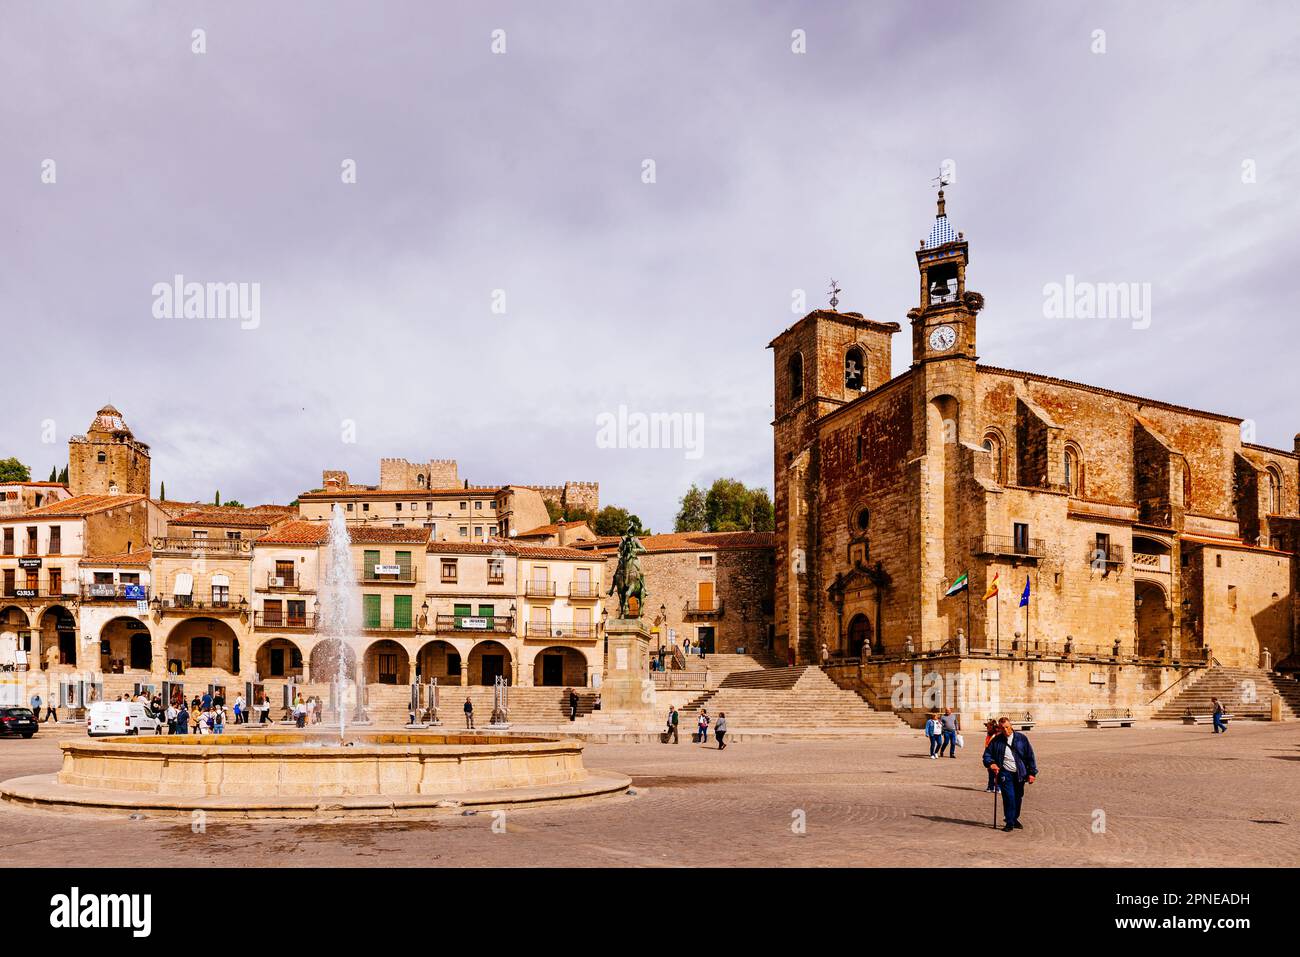 Panoramic view of Plaza Mayor, with San Martin church (R) and arcaded houses (L). Trujillo, Cáceres, Extremadura, Spain, Europe Stock Photo